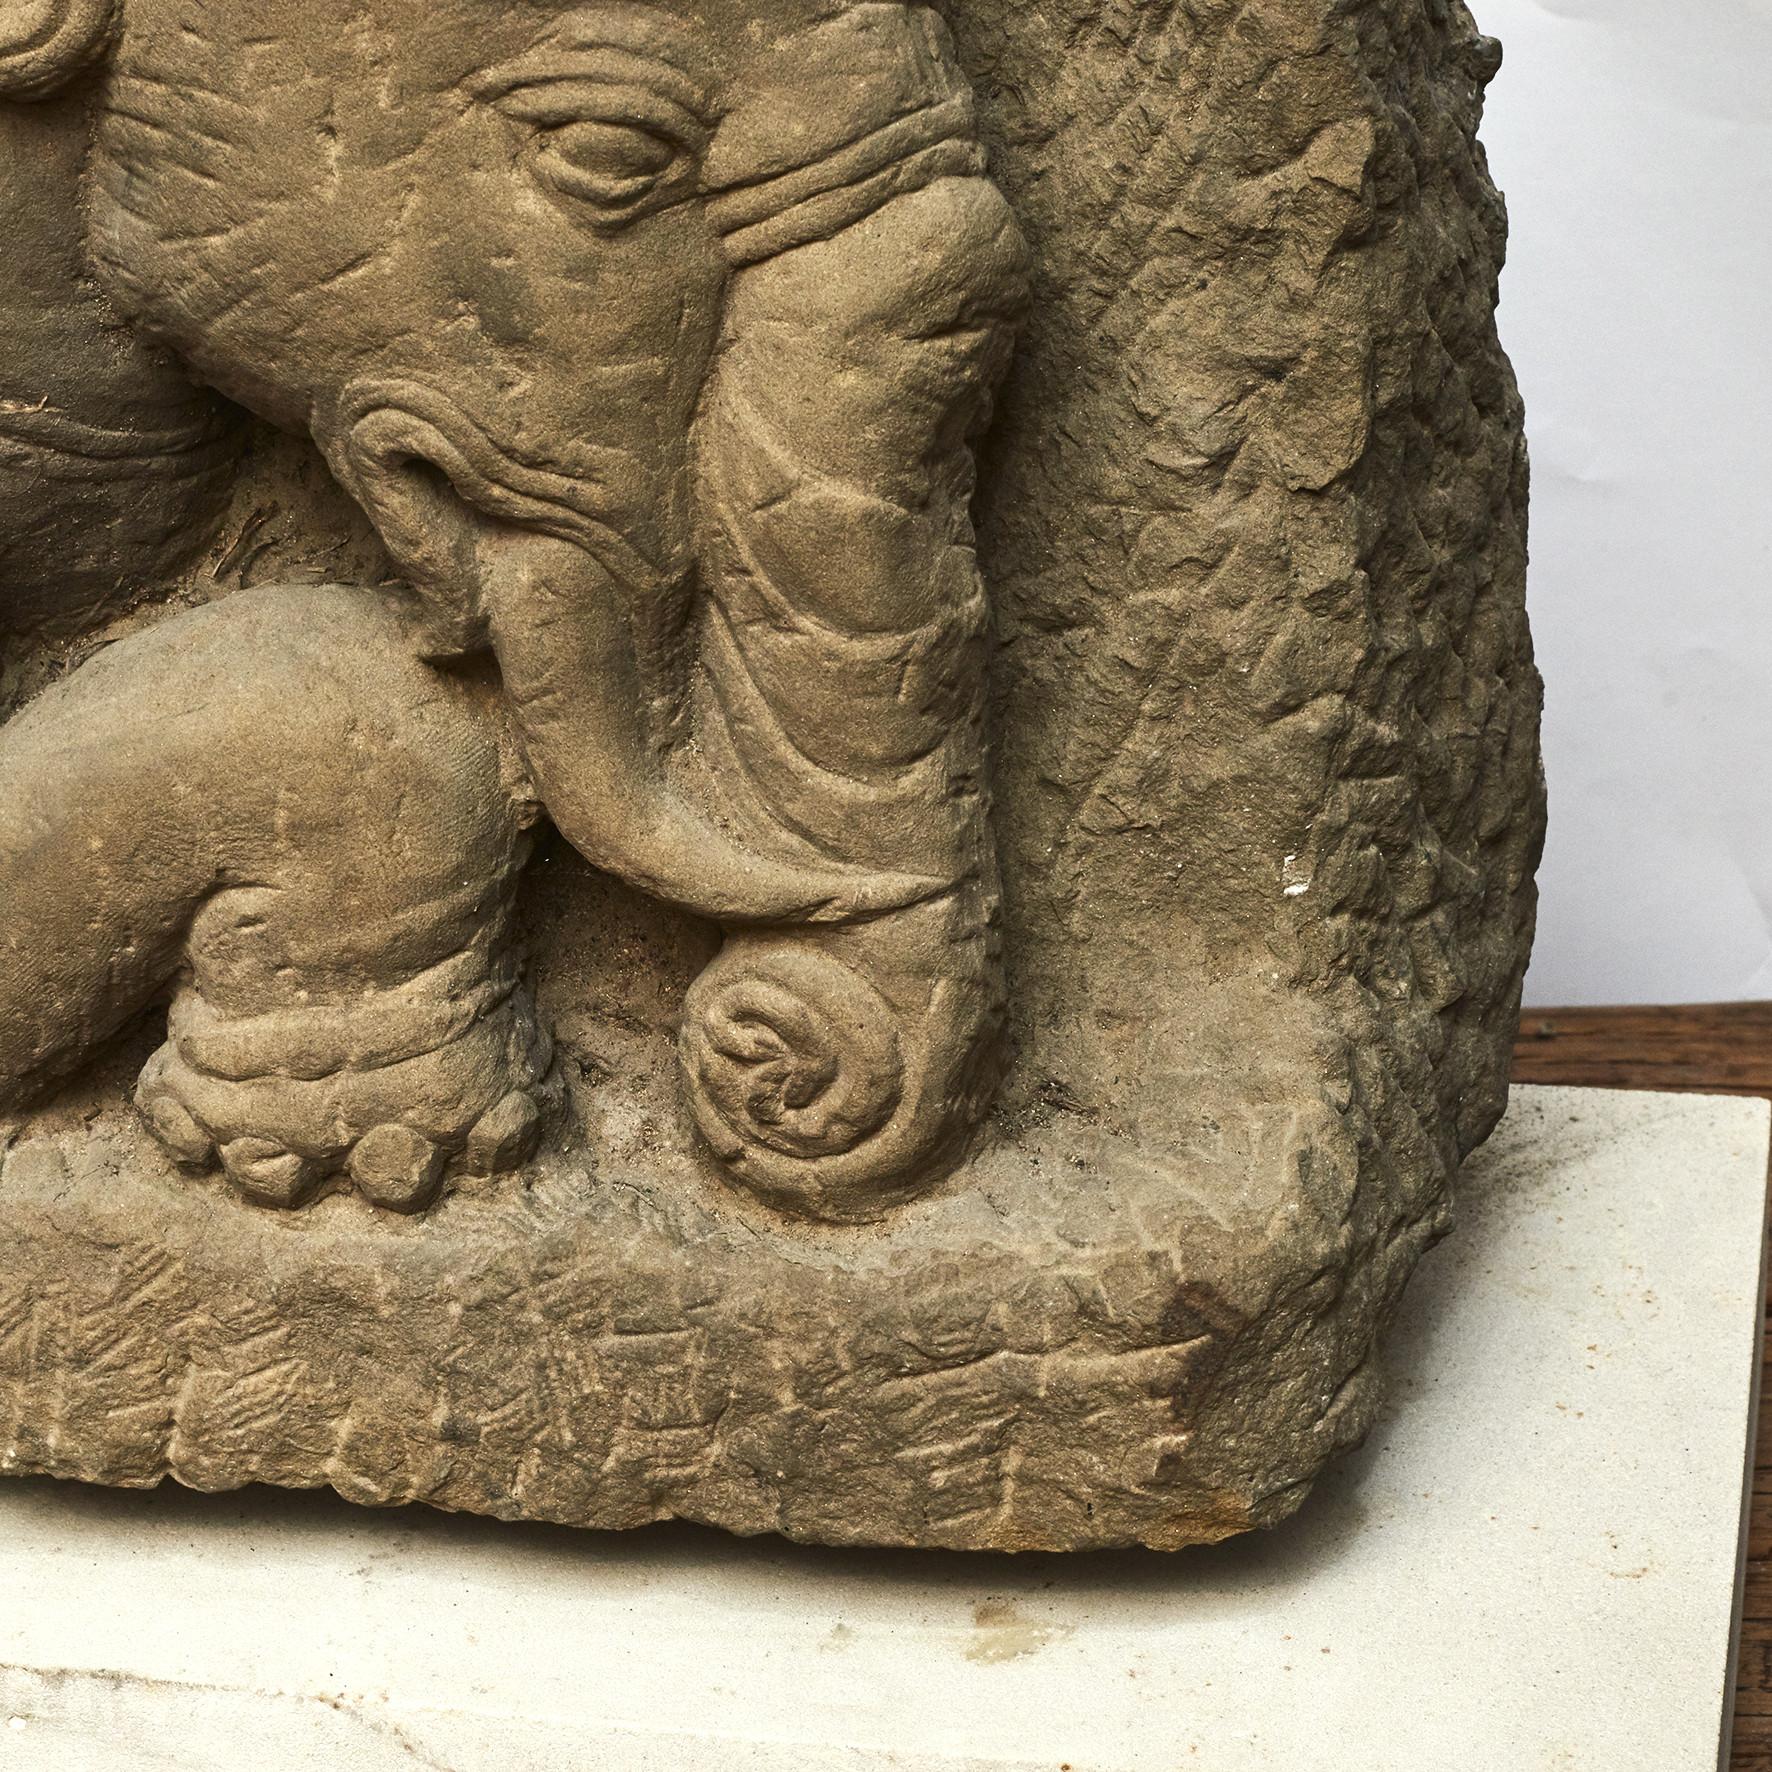 400-500 old Burmese sandstone elephant with beautifully detailed carvings.
Very decorative with natural patina. Forehead with older repair
From pagoda / temple in Burma (Myanmar), Arakan.

Provenance: From private collection, Denmark.